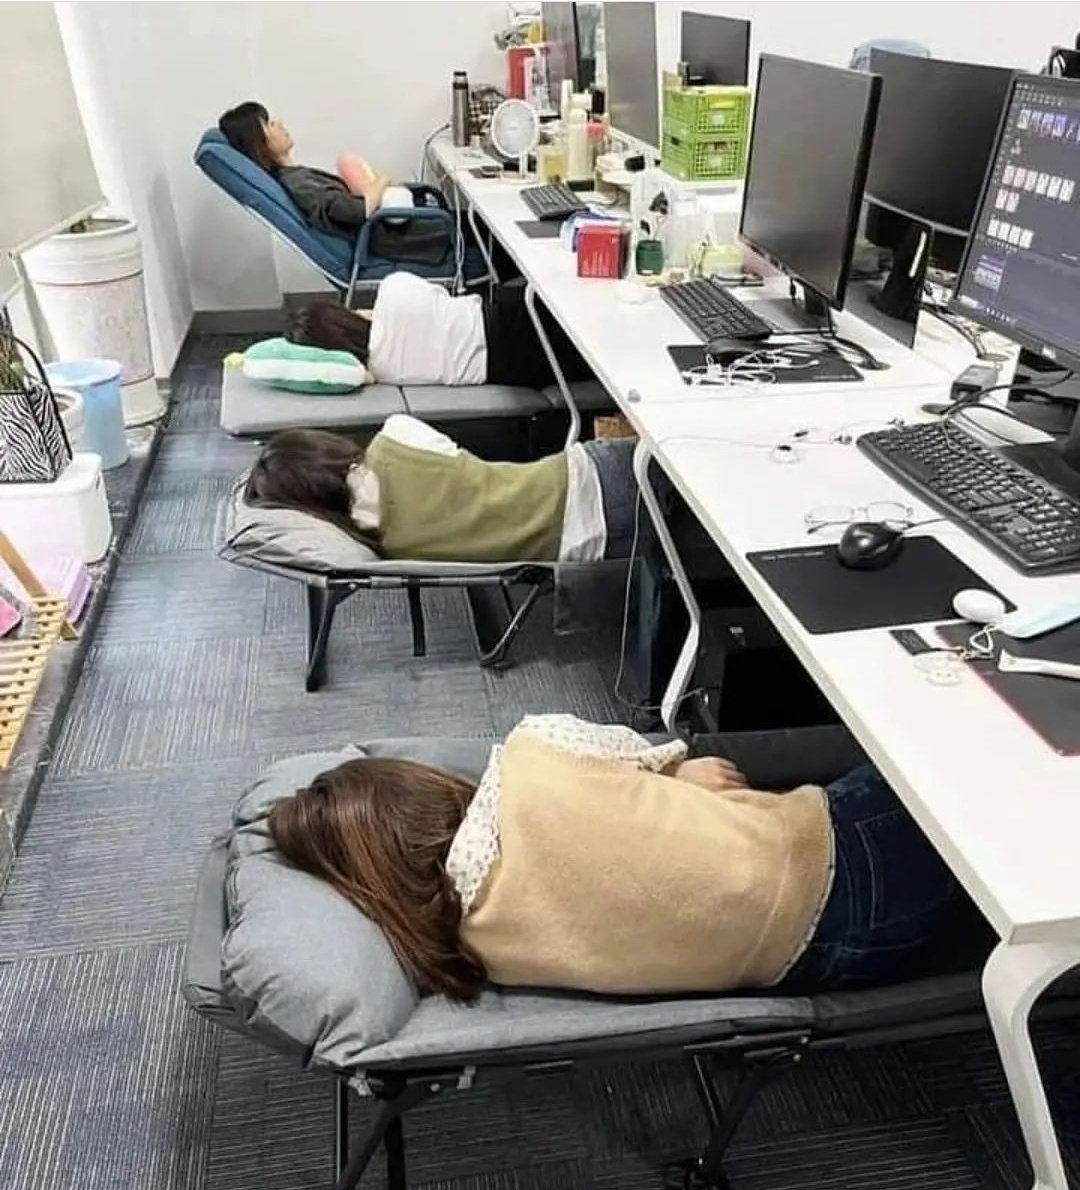 RT @aashi__02: Normalise naps at work. https://t.co/hFcpA3a3q1